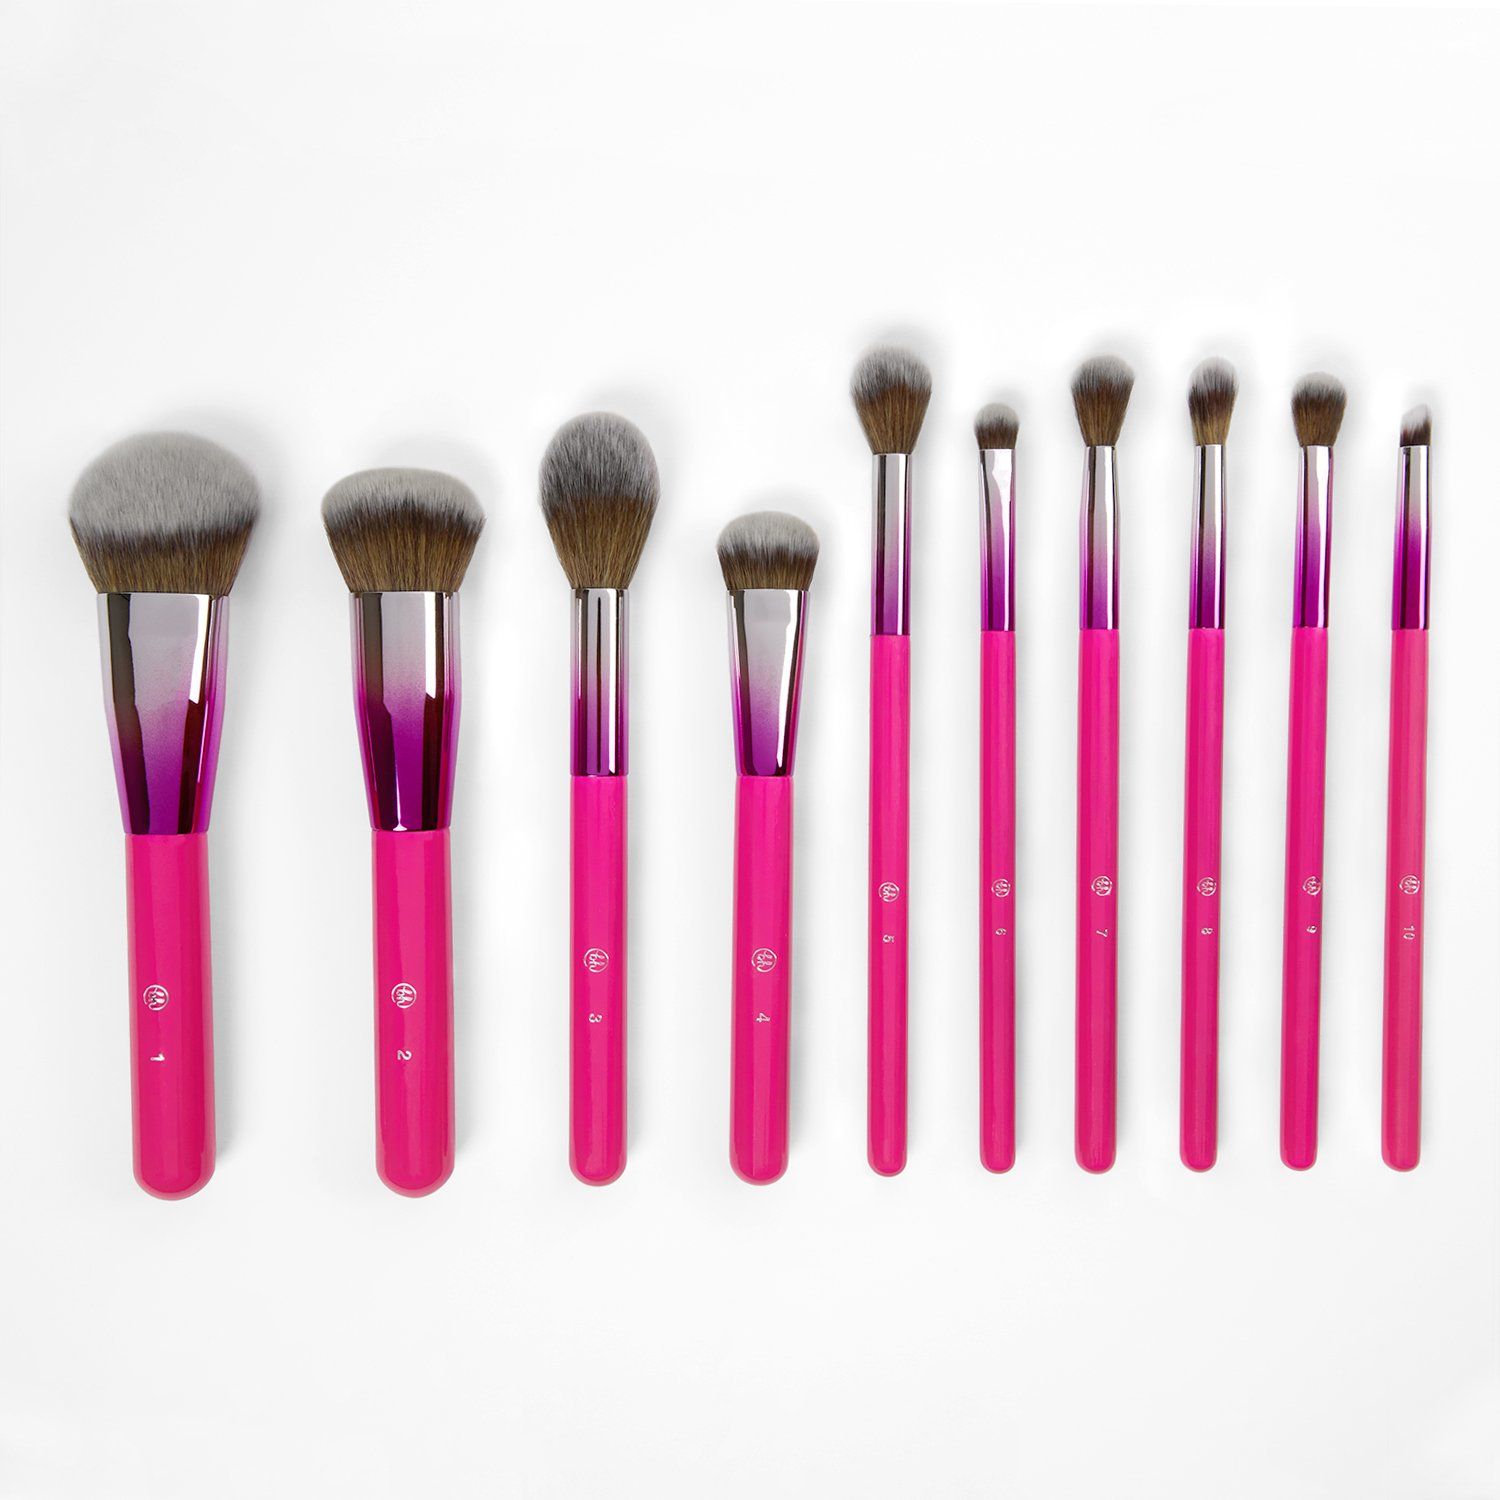 21 Best Makeup Brush Sets To Gift In